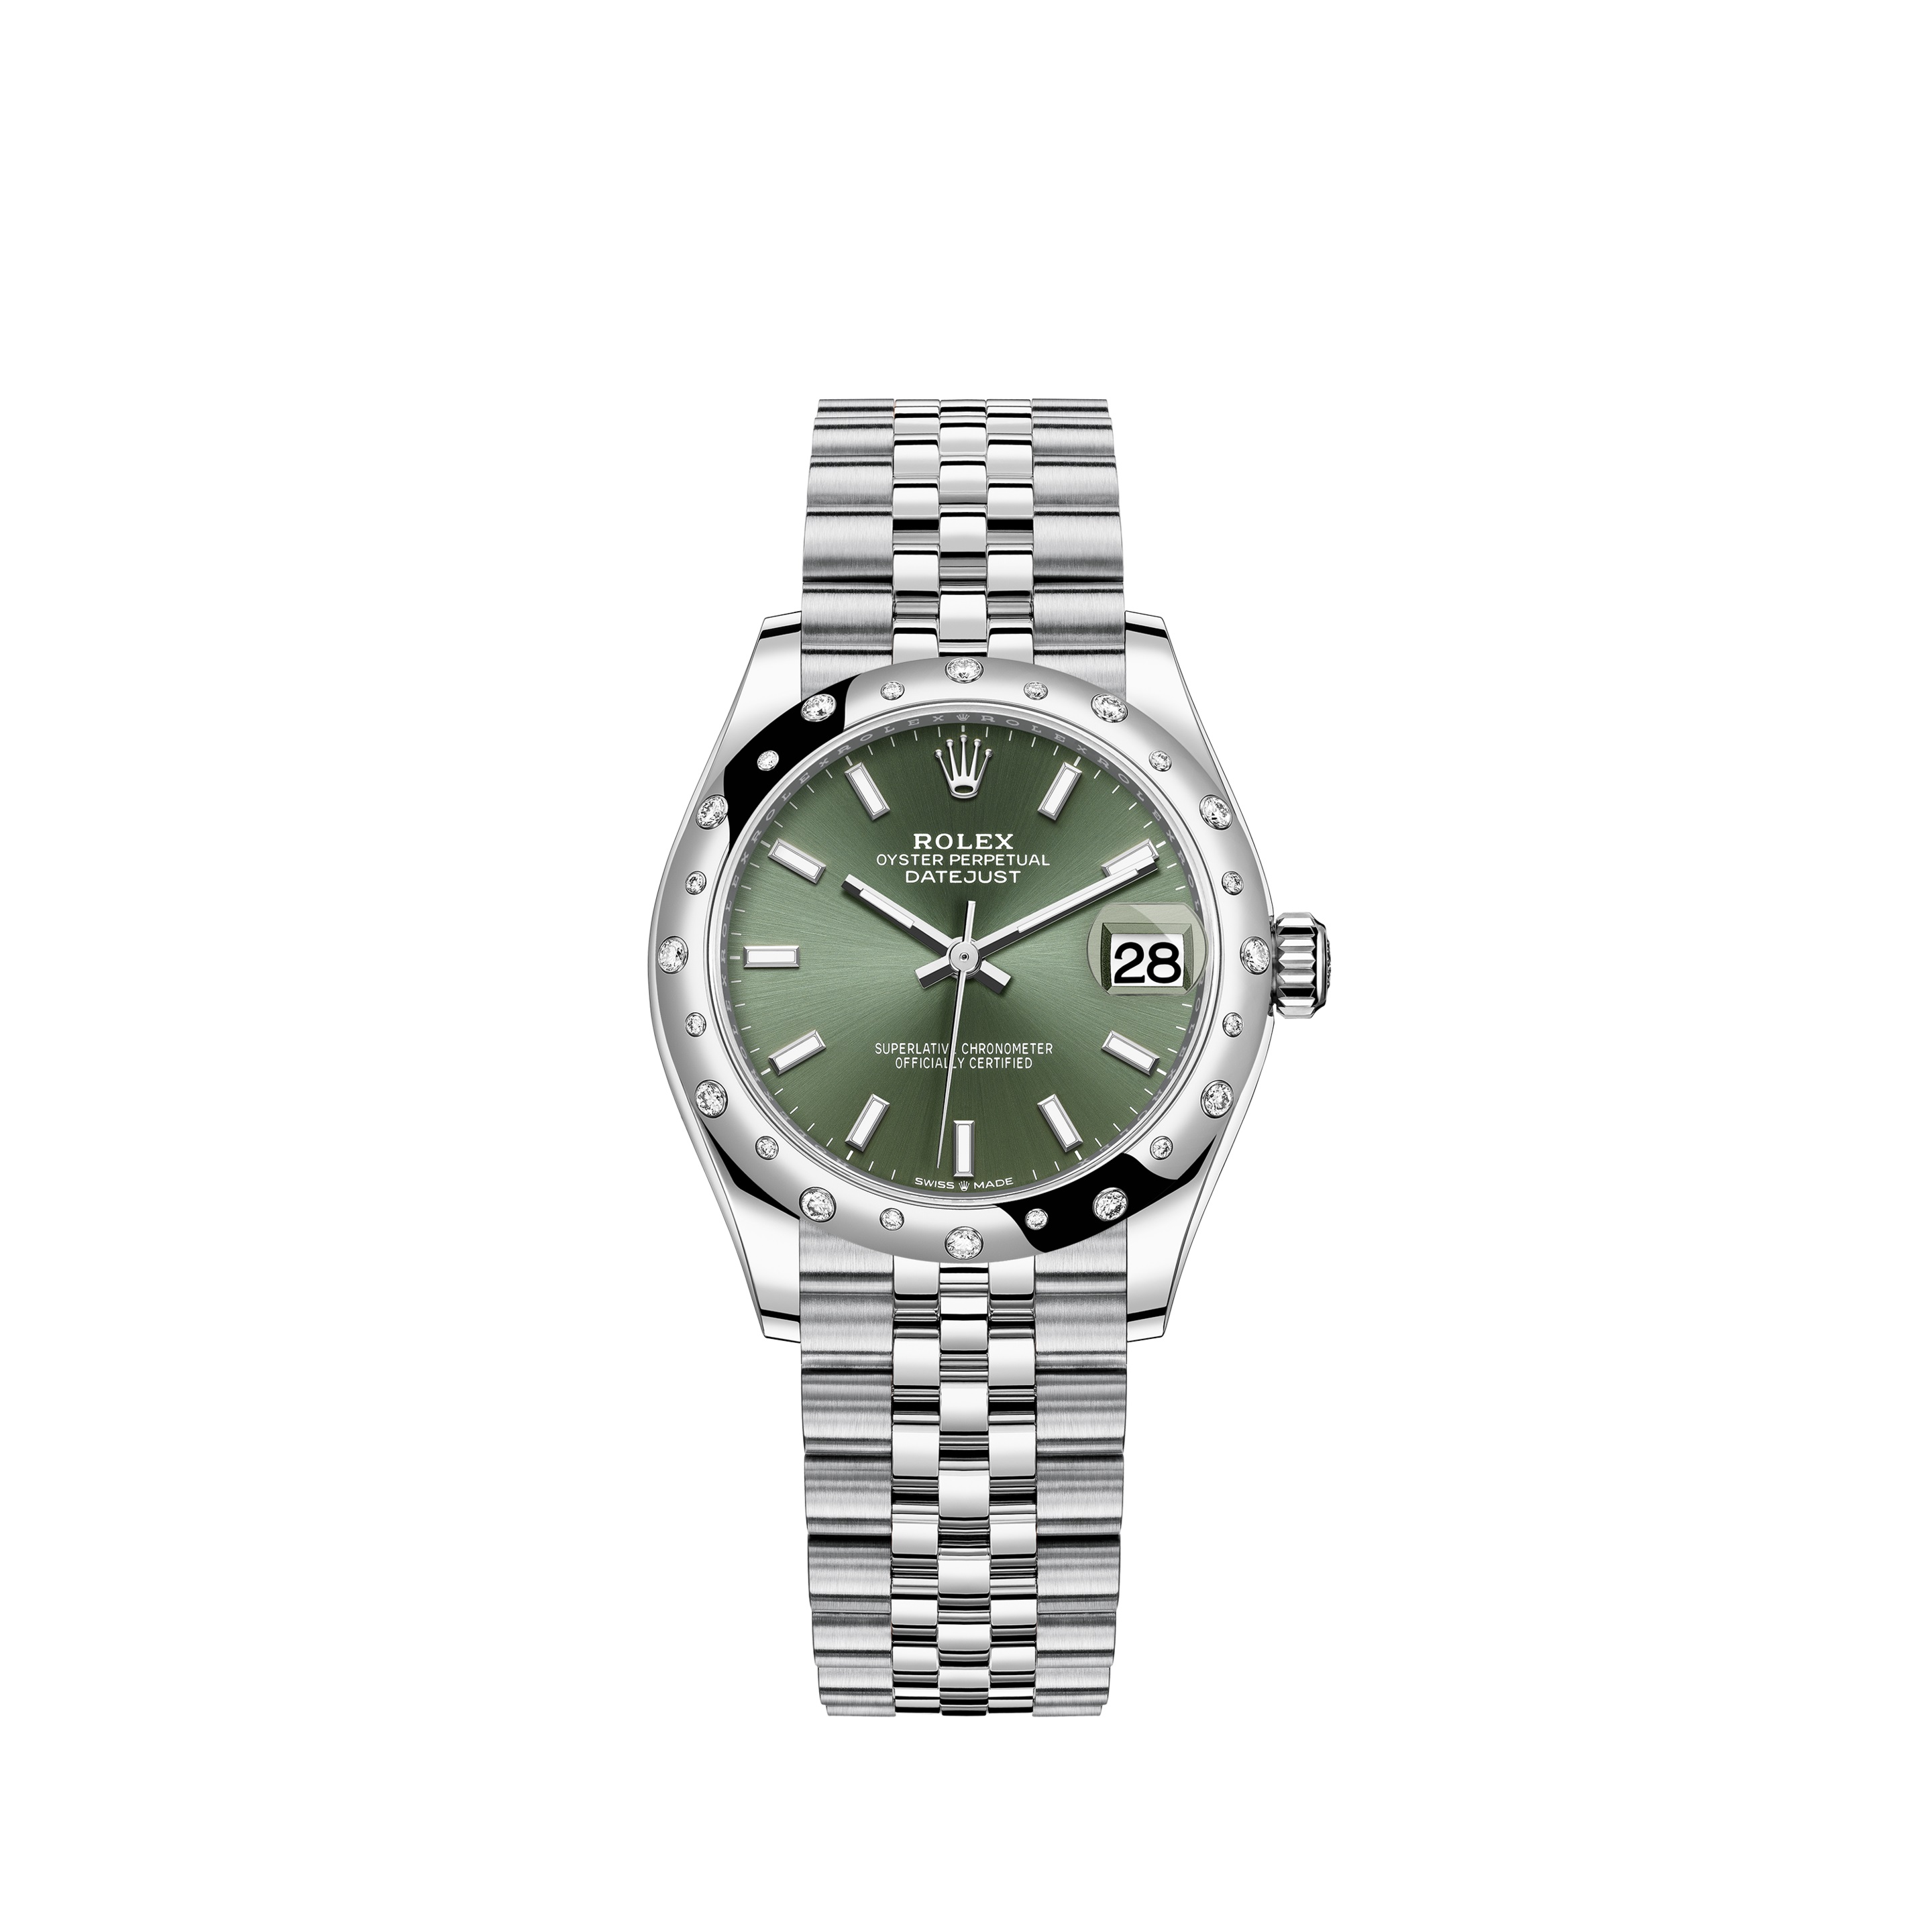 Datejust 31 278344RBR White Gold & Stainless Steel Watch (Mint Green) - Click Image to Close